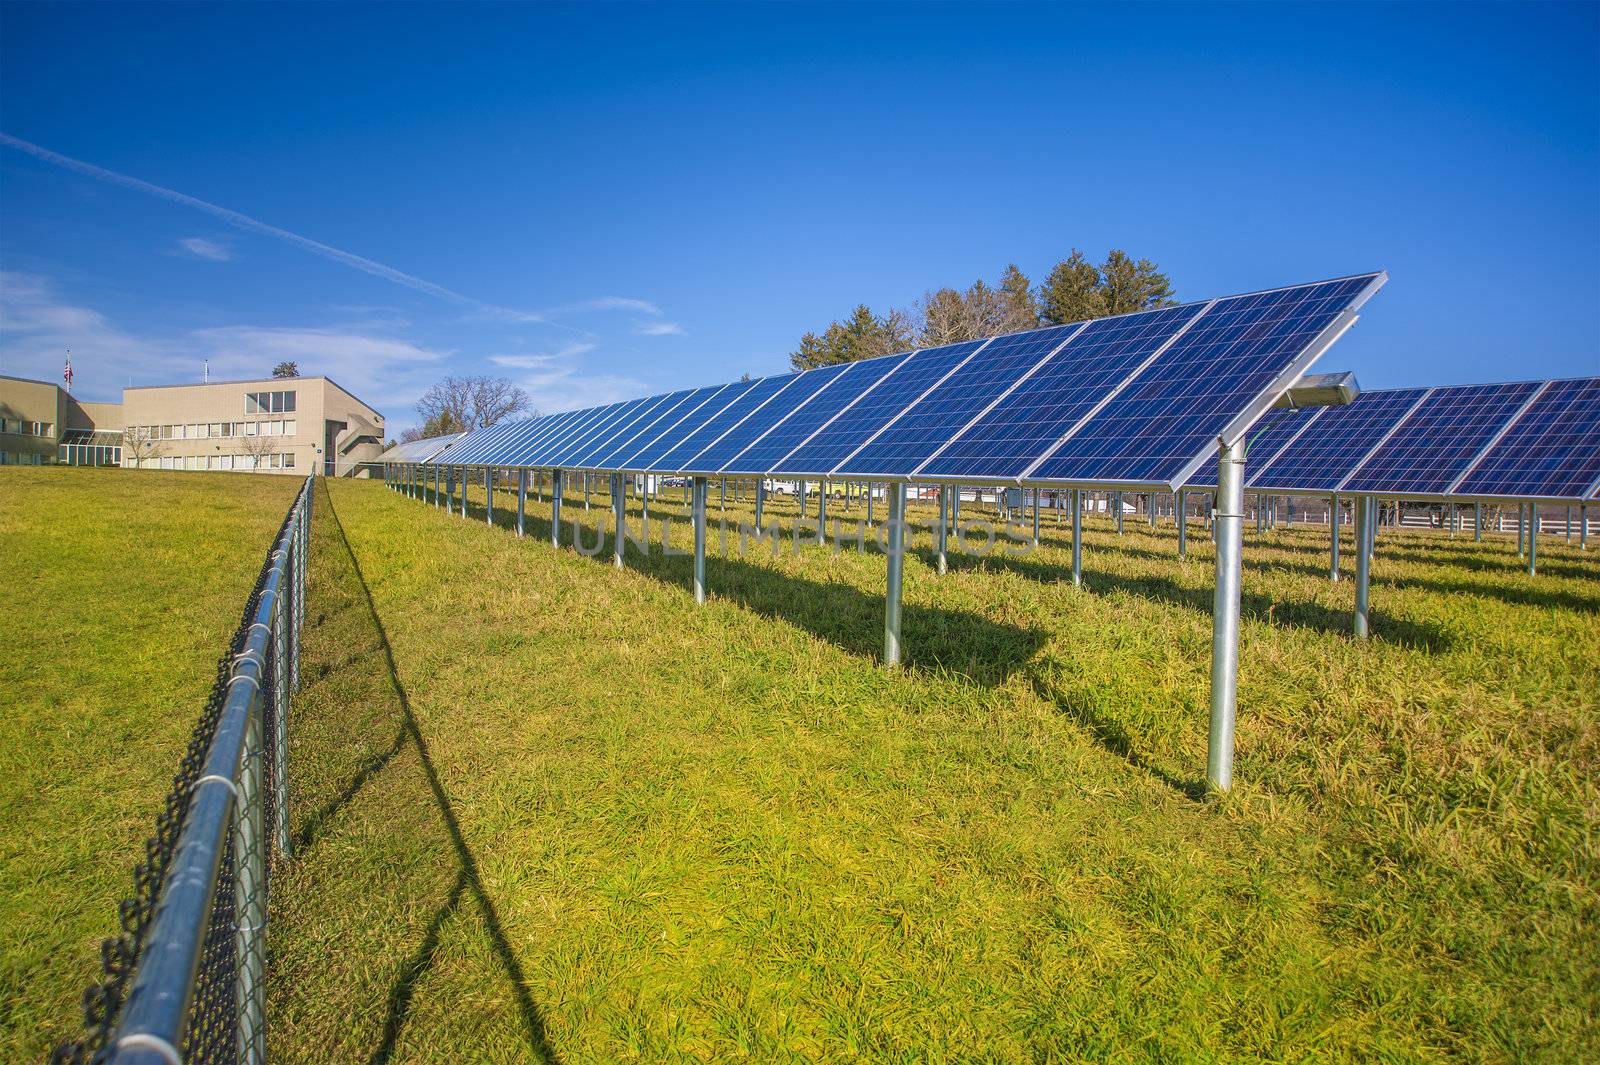 Solar panels in field with blue sky used to furnish electricity to building